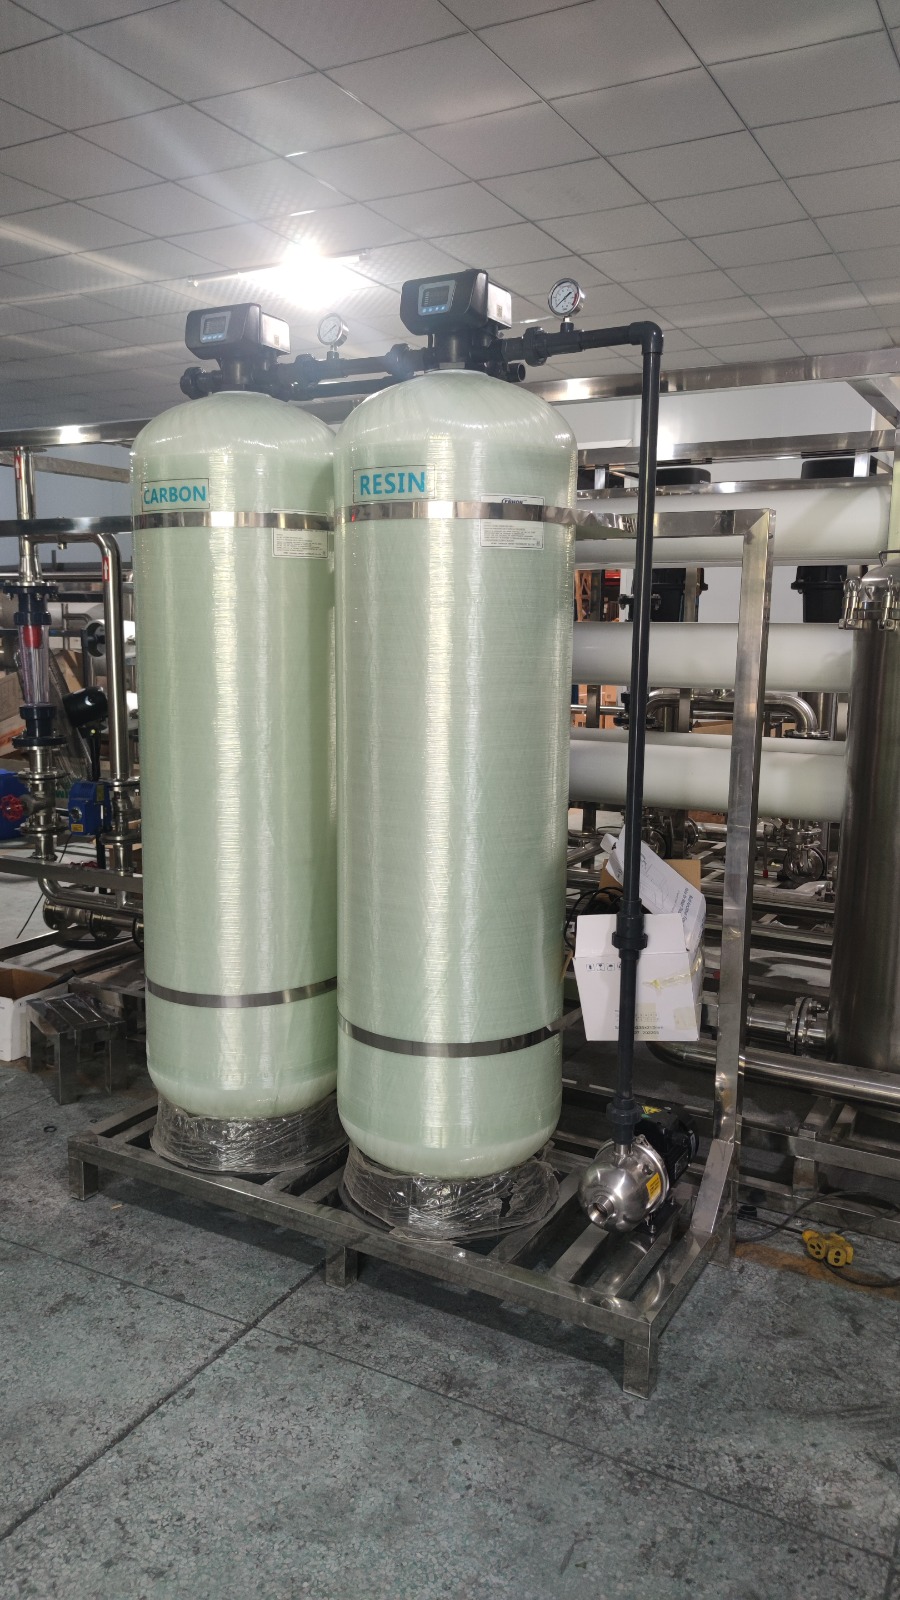 Stainless Steel Pure Water Machine UV sterilizer reverse osmosis systems 2000lph water treatment machinery